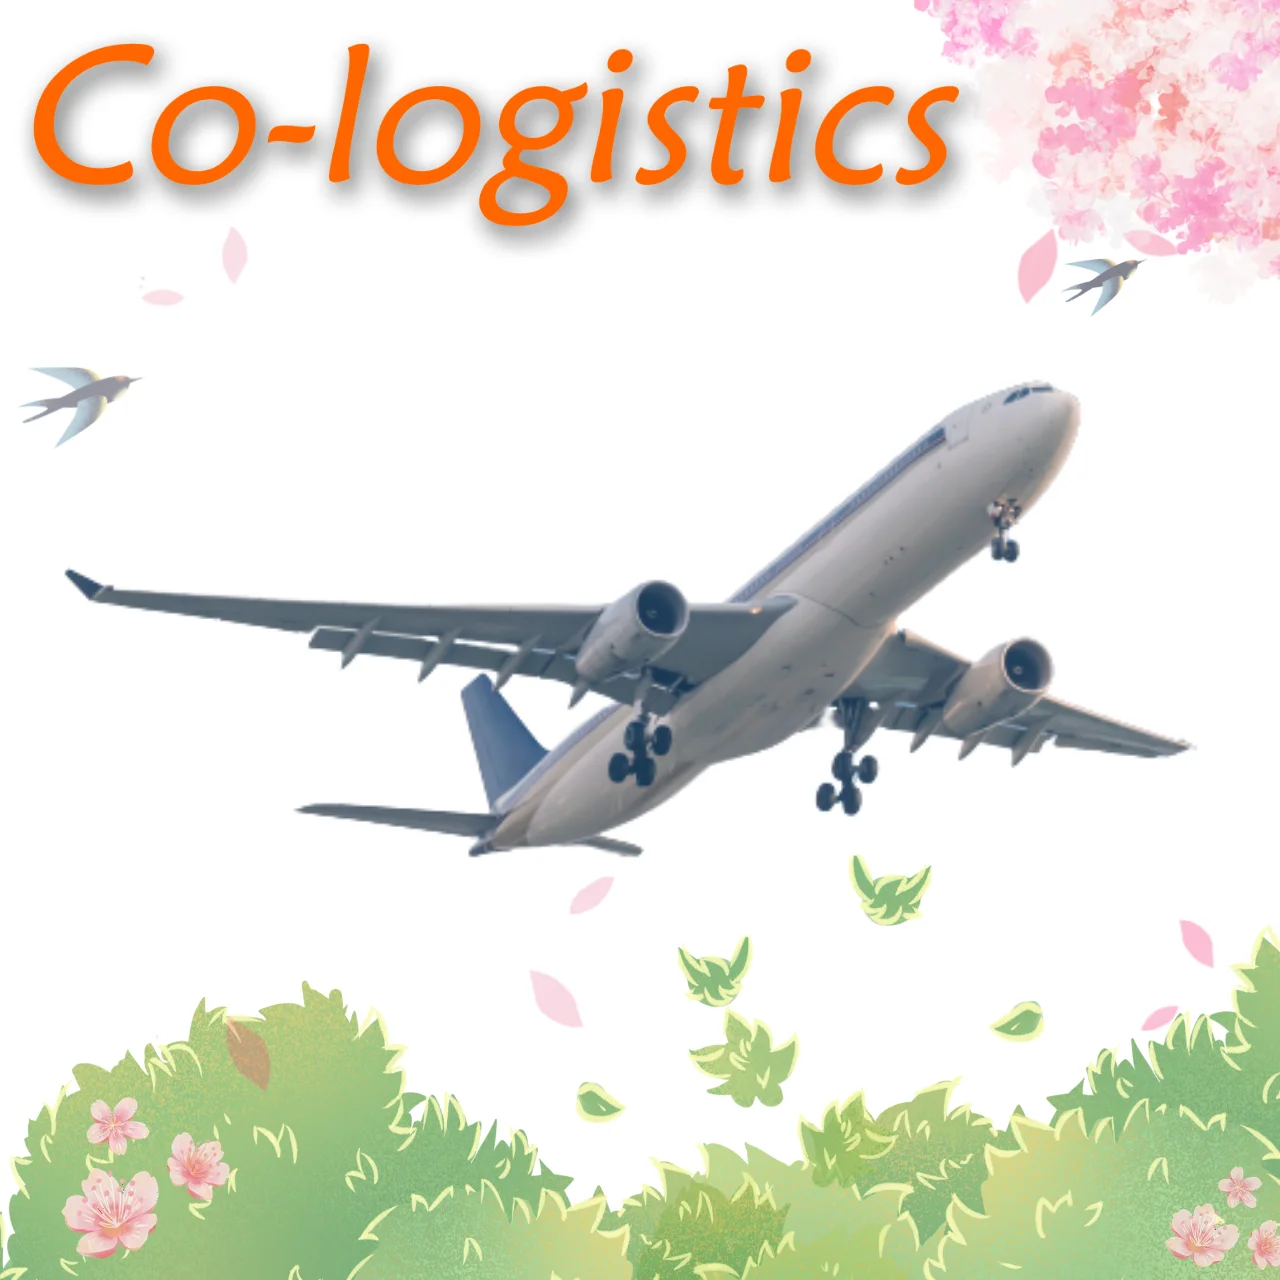 China Shipping Agent to USA/Canada Air Freight service from SHENZHEN/SHANGHAI  DDP AIR Cargo Amazon  service